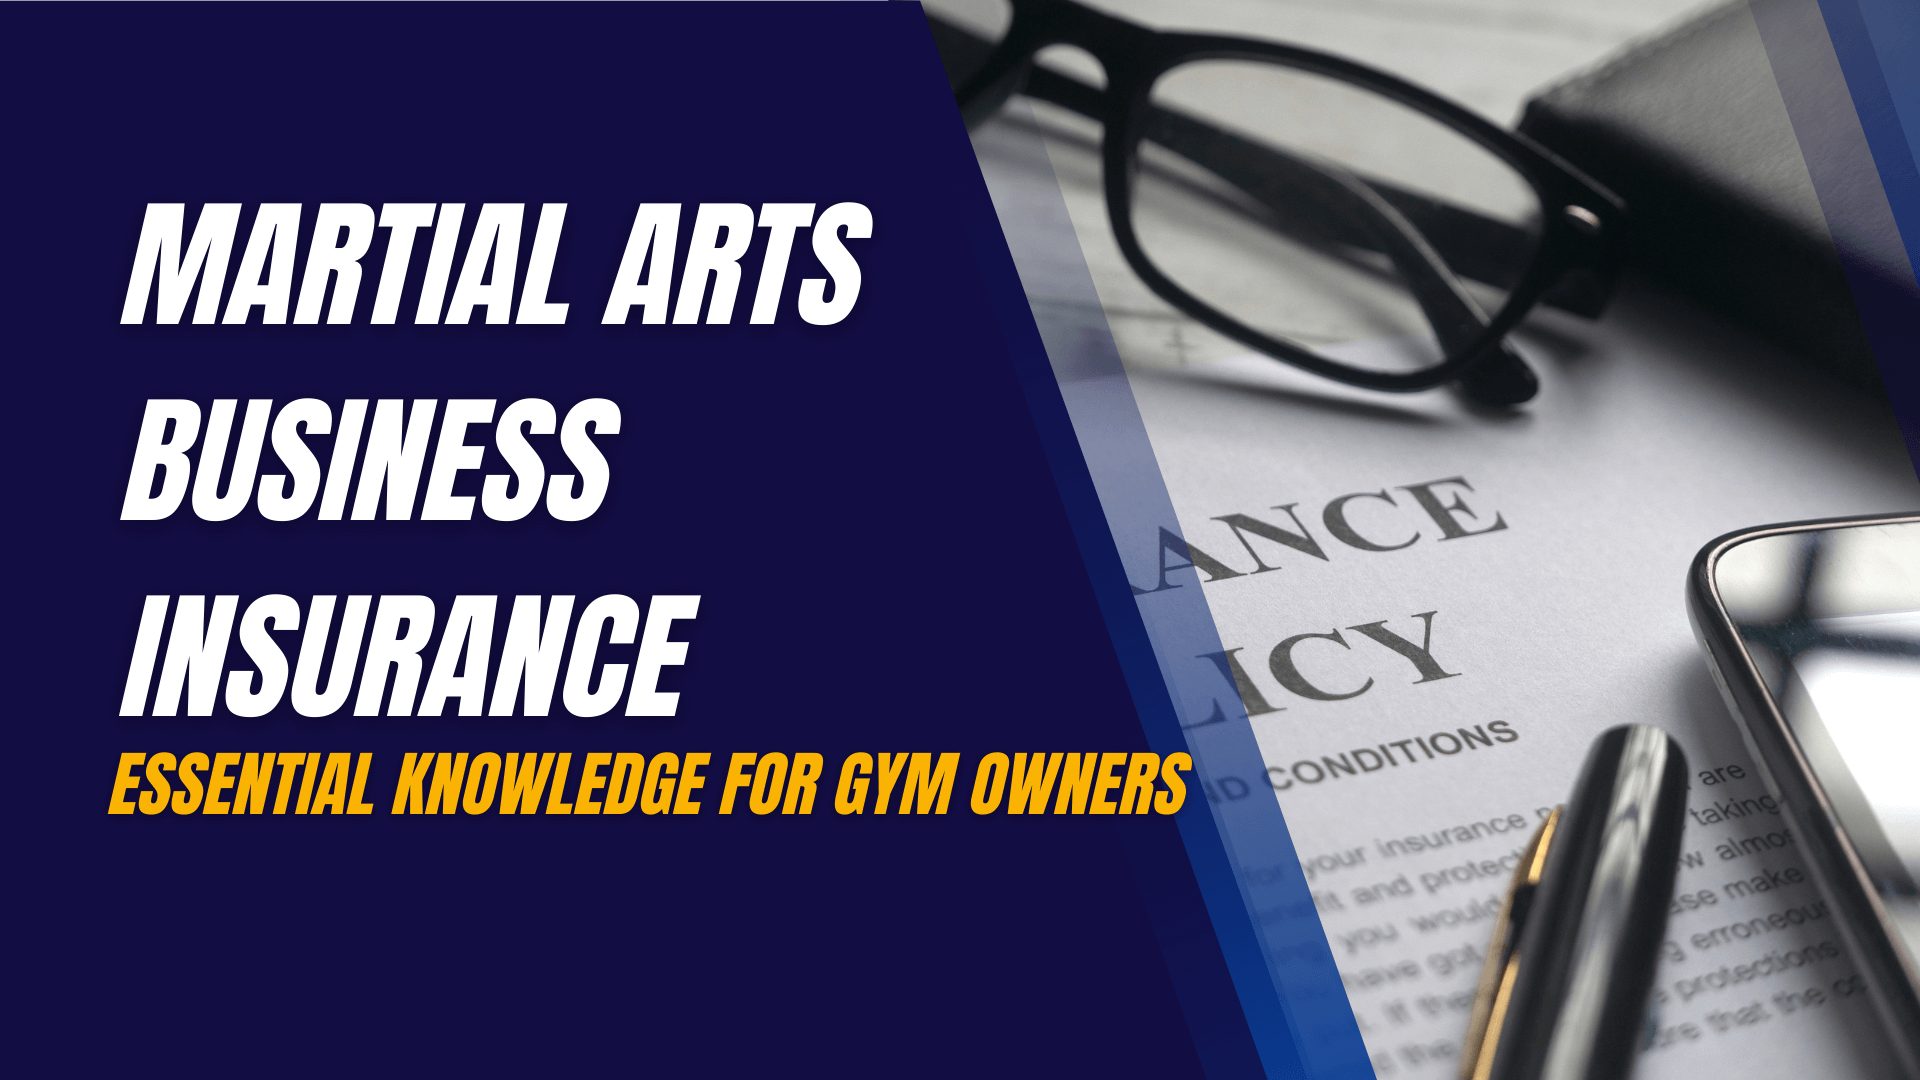 Martial Arts Business Insurance: Essential Knowledge for Gym Owners